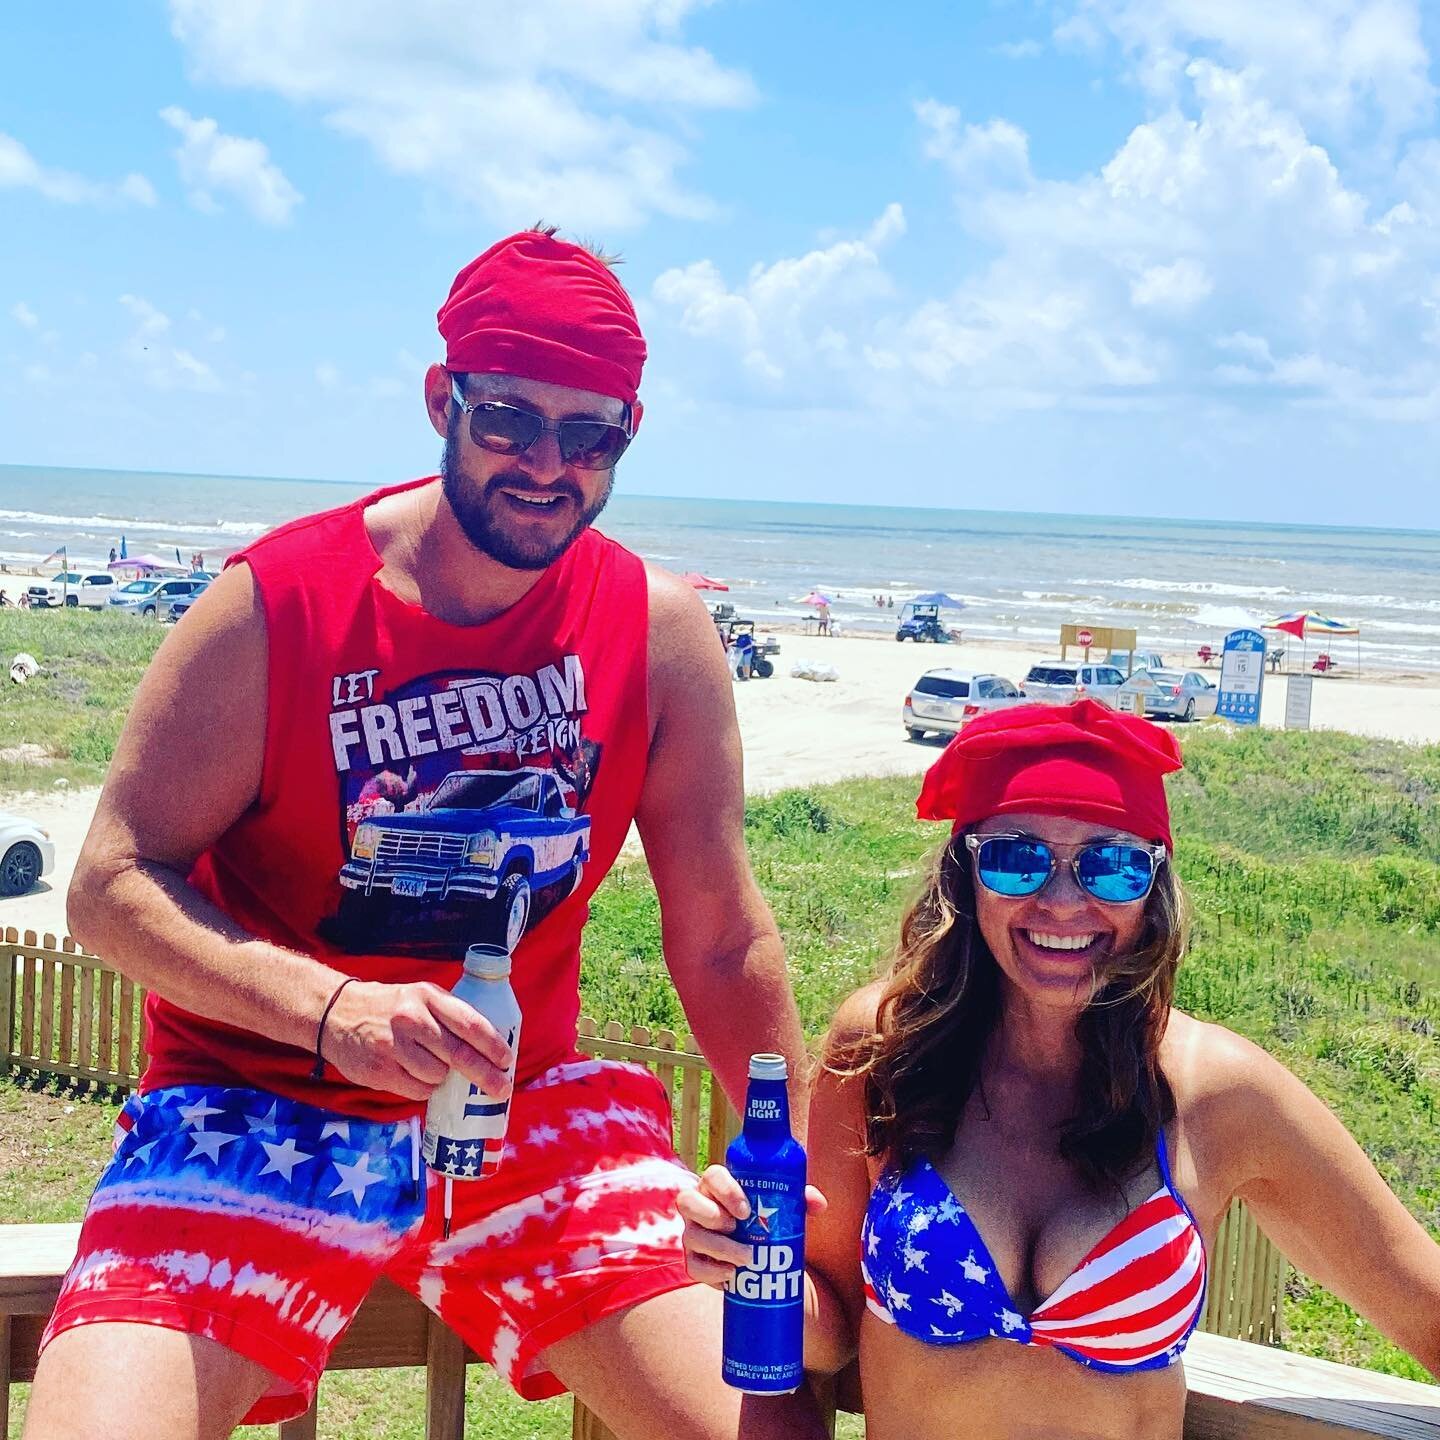 #latergram Suits original design by Betsy Ross. Hats by @cpflanz sleeves. Glasses by @michaelscraftstore Photo by @atti2udechic When in Texas. #buffoonery #texasbeach #fourthofjuly #i #dont #even #drink #beer